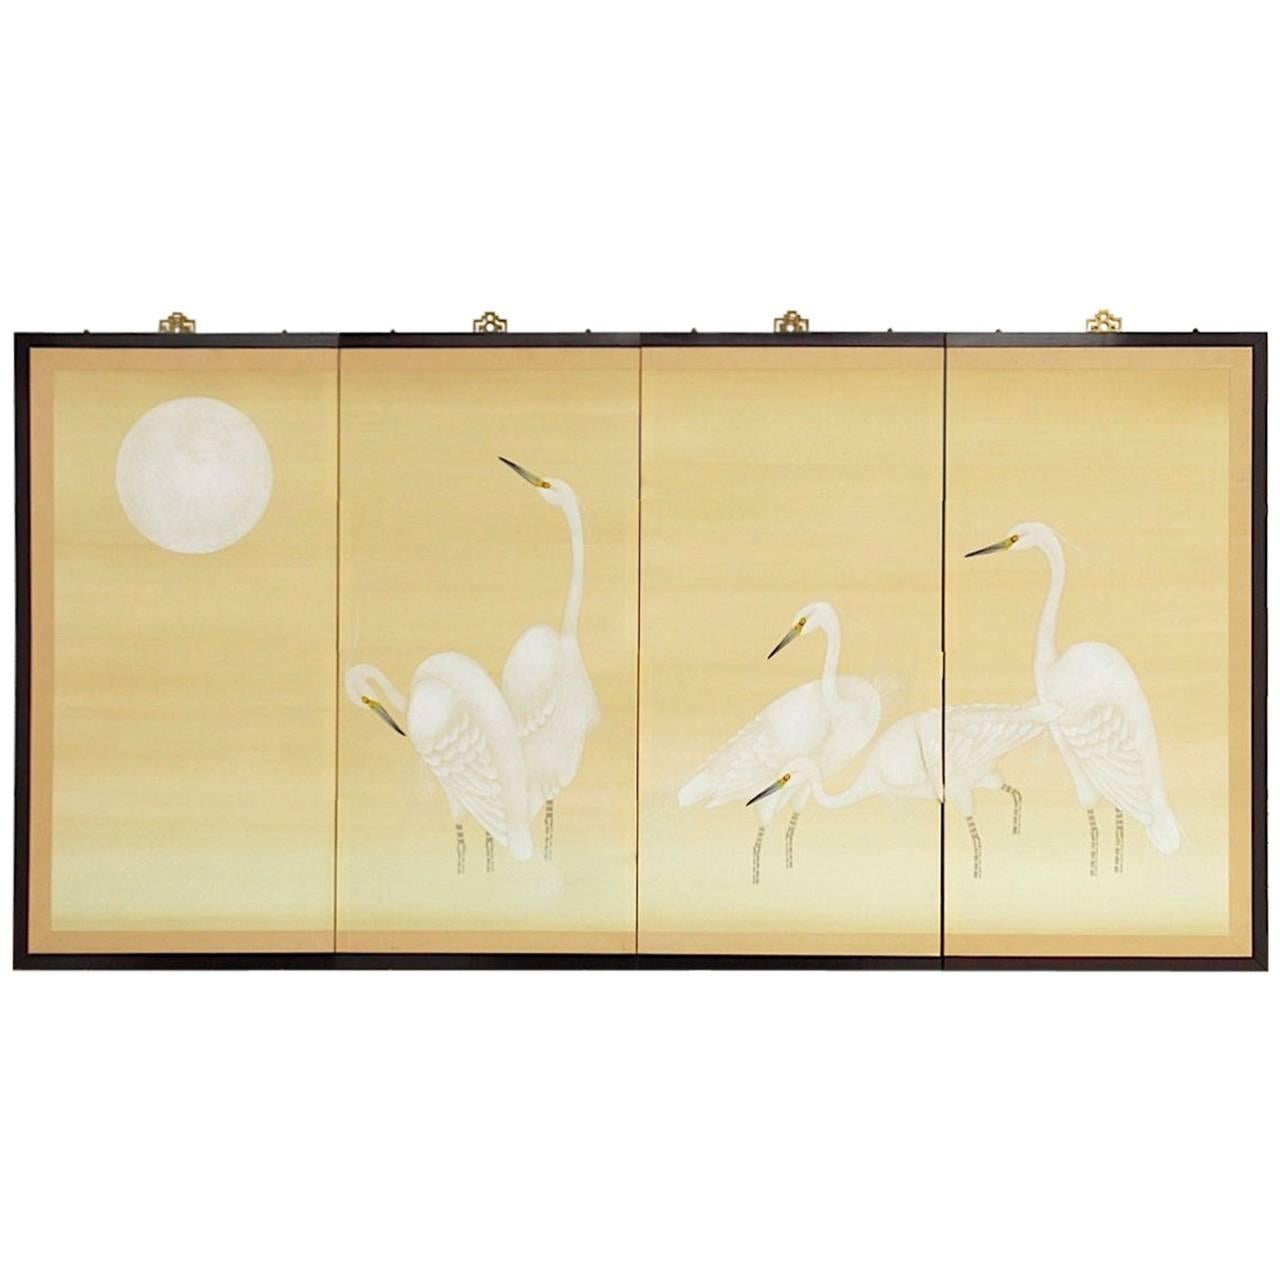 Japanese Four-Panel Screen of White Cranes and Moon